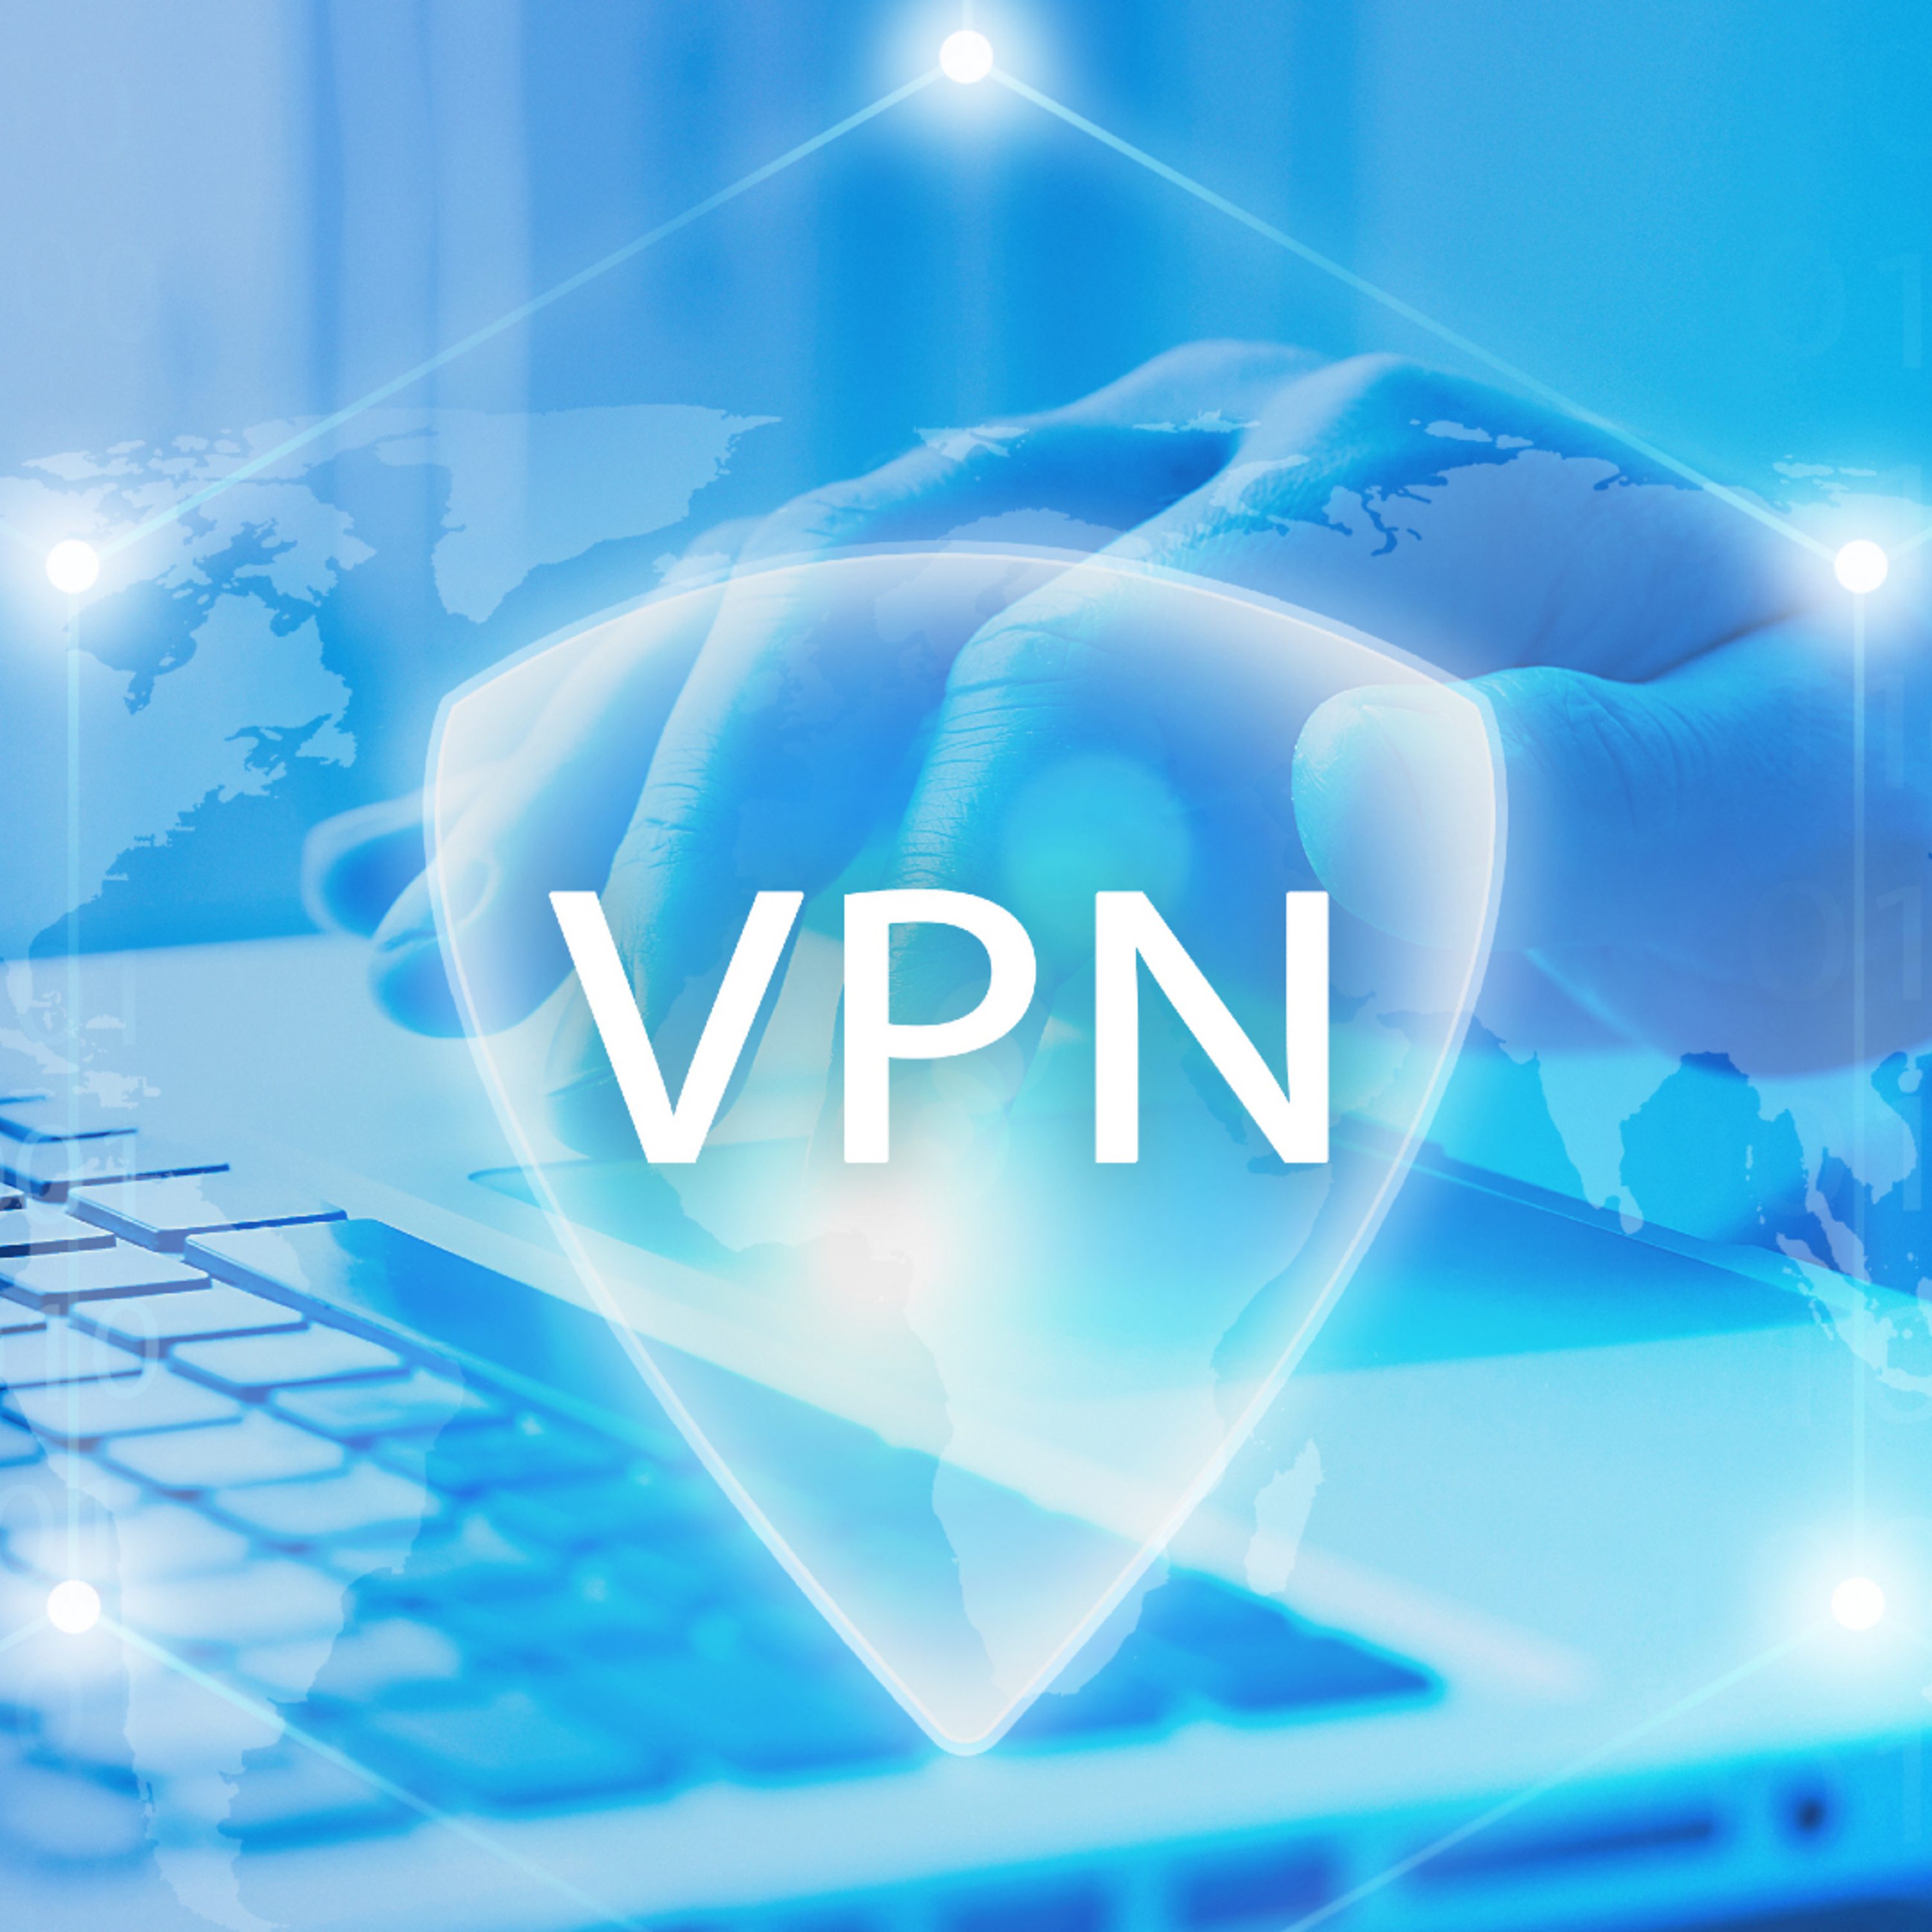 The world of VPNs